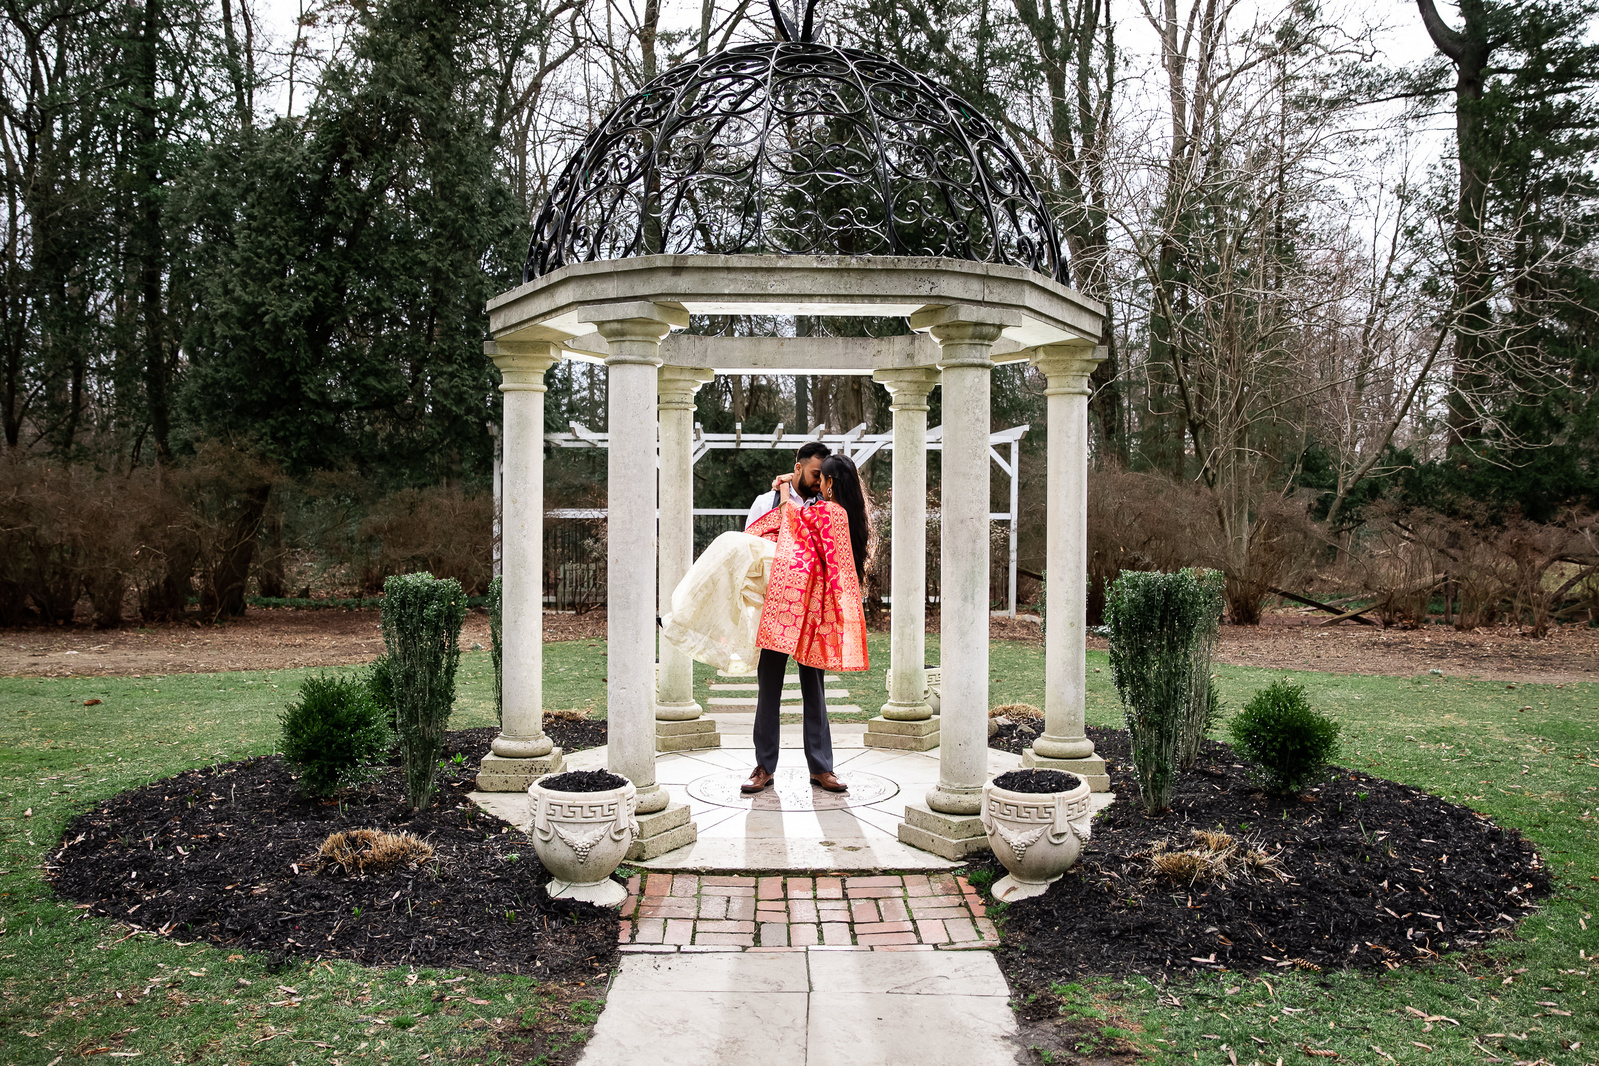 Couple engagment session under a gazebo in a garden